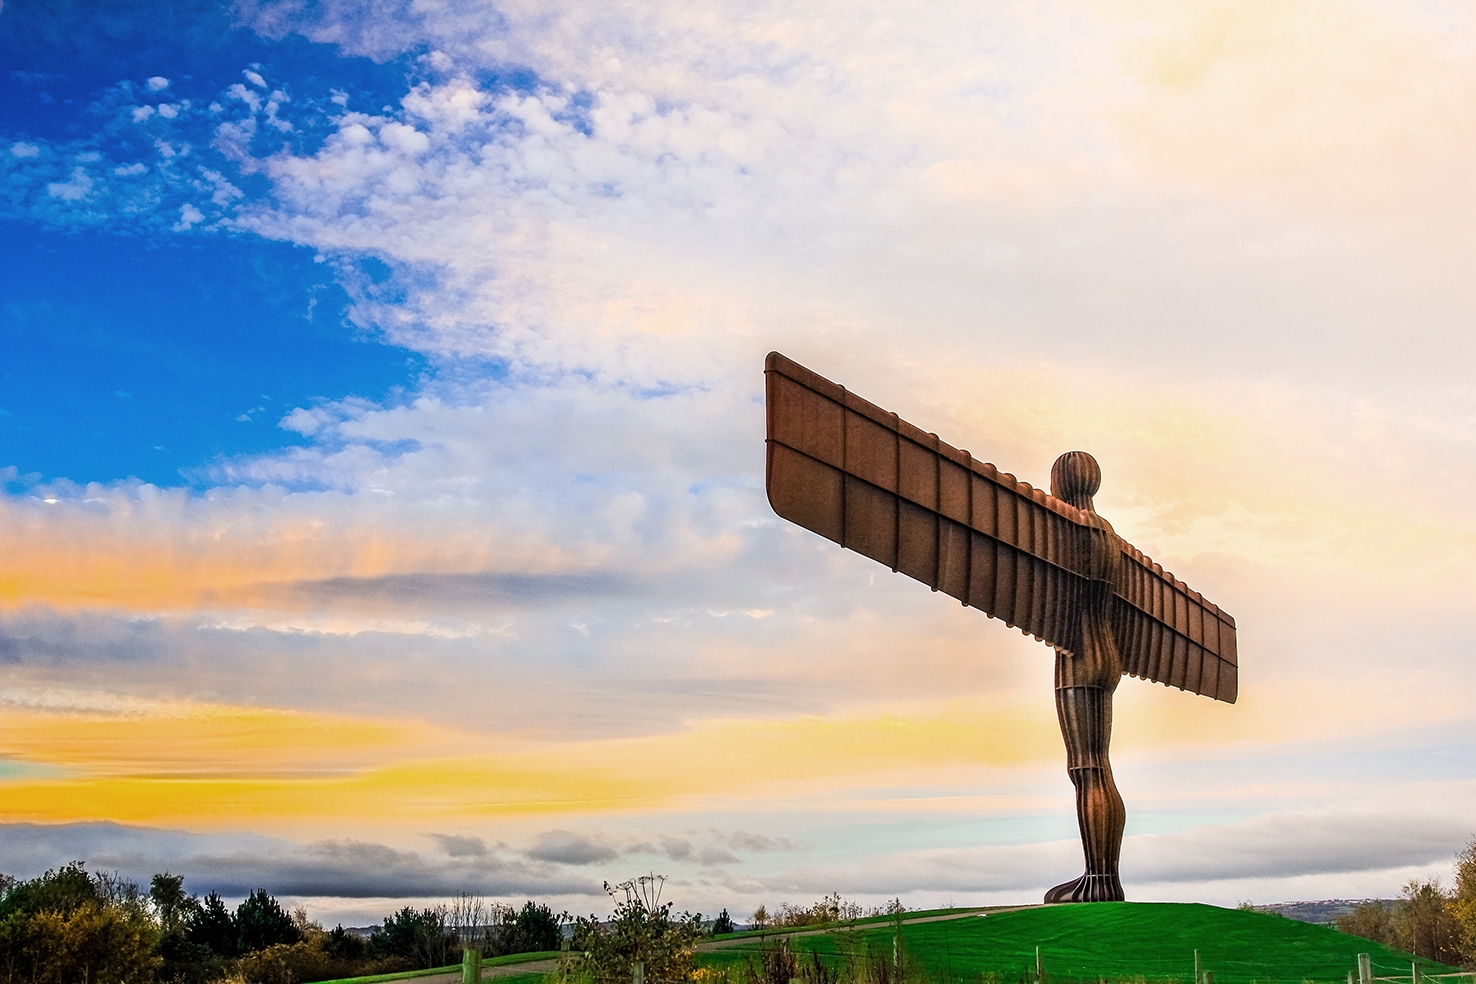 It’s got to be Gateshead – why the spotlight is turning onto this regional town